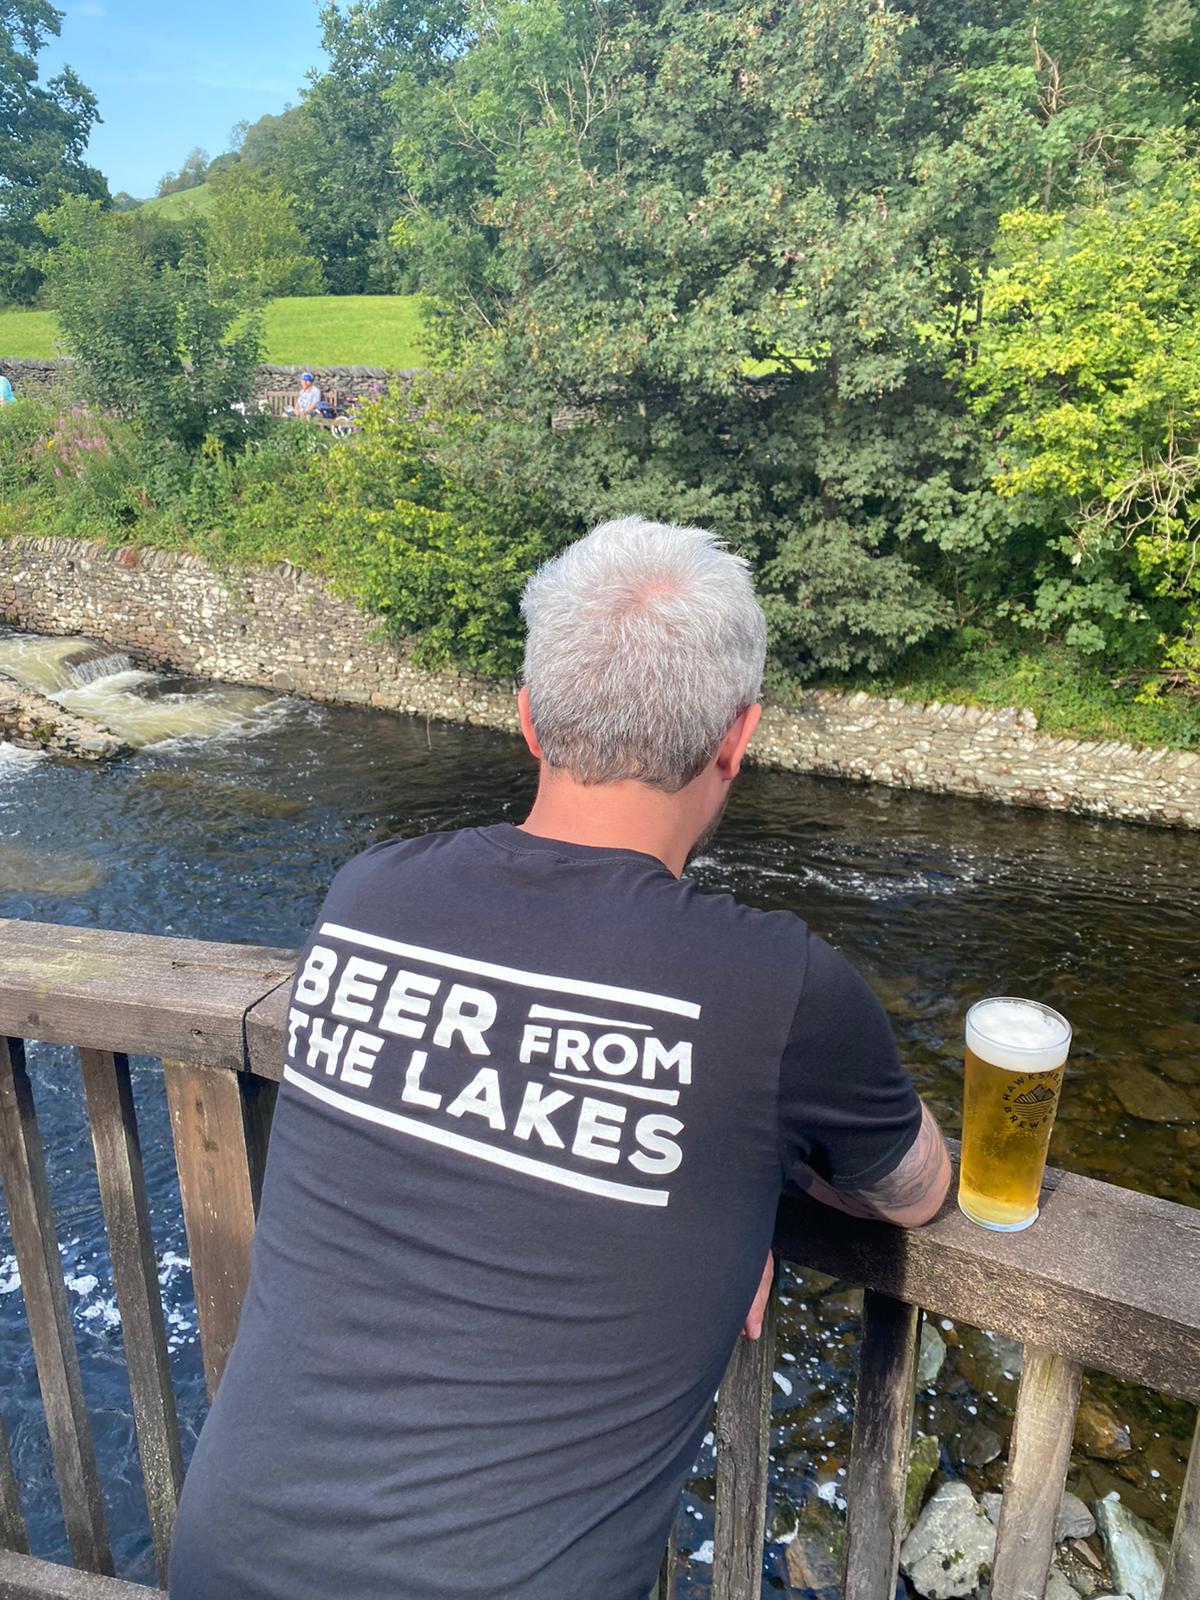 Hawkshead Brewery Black T-Shirt with White Logo 'Beer From The Lakes'